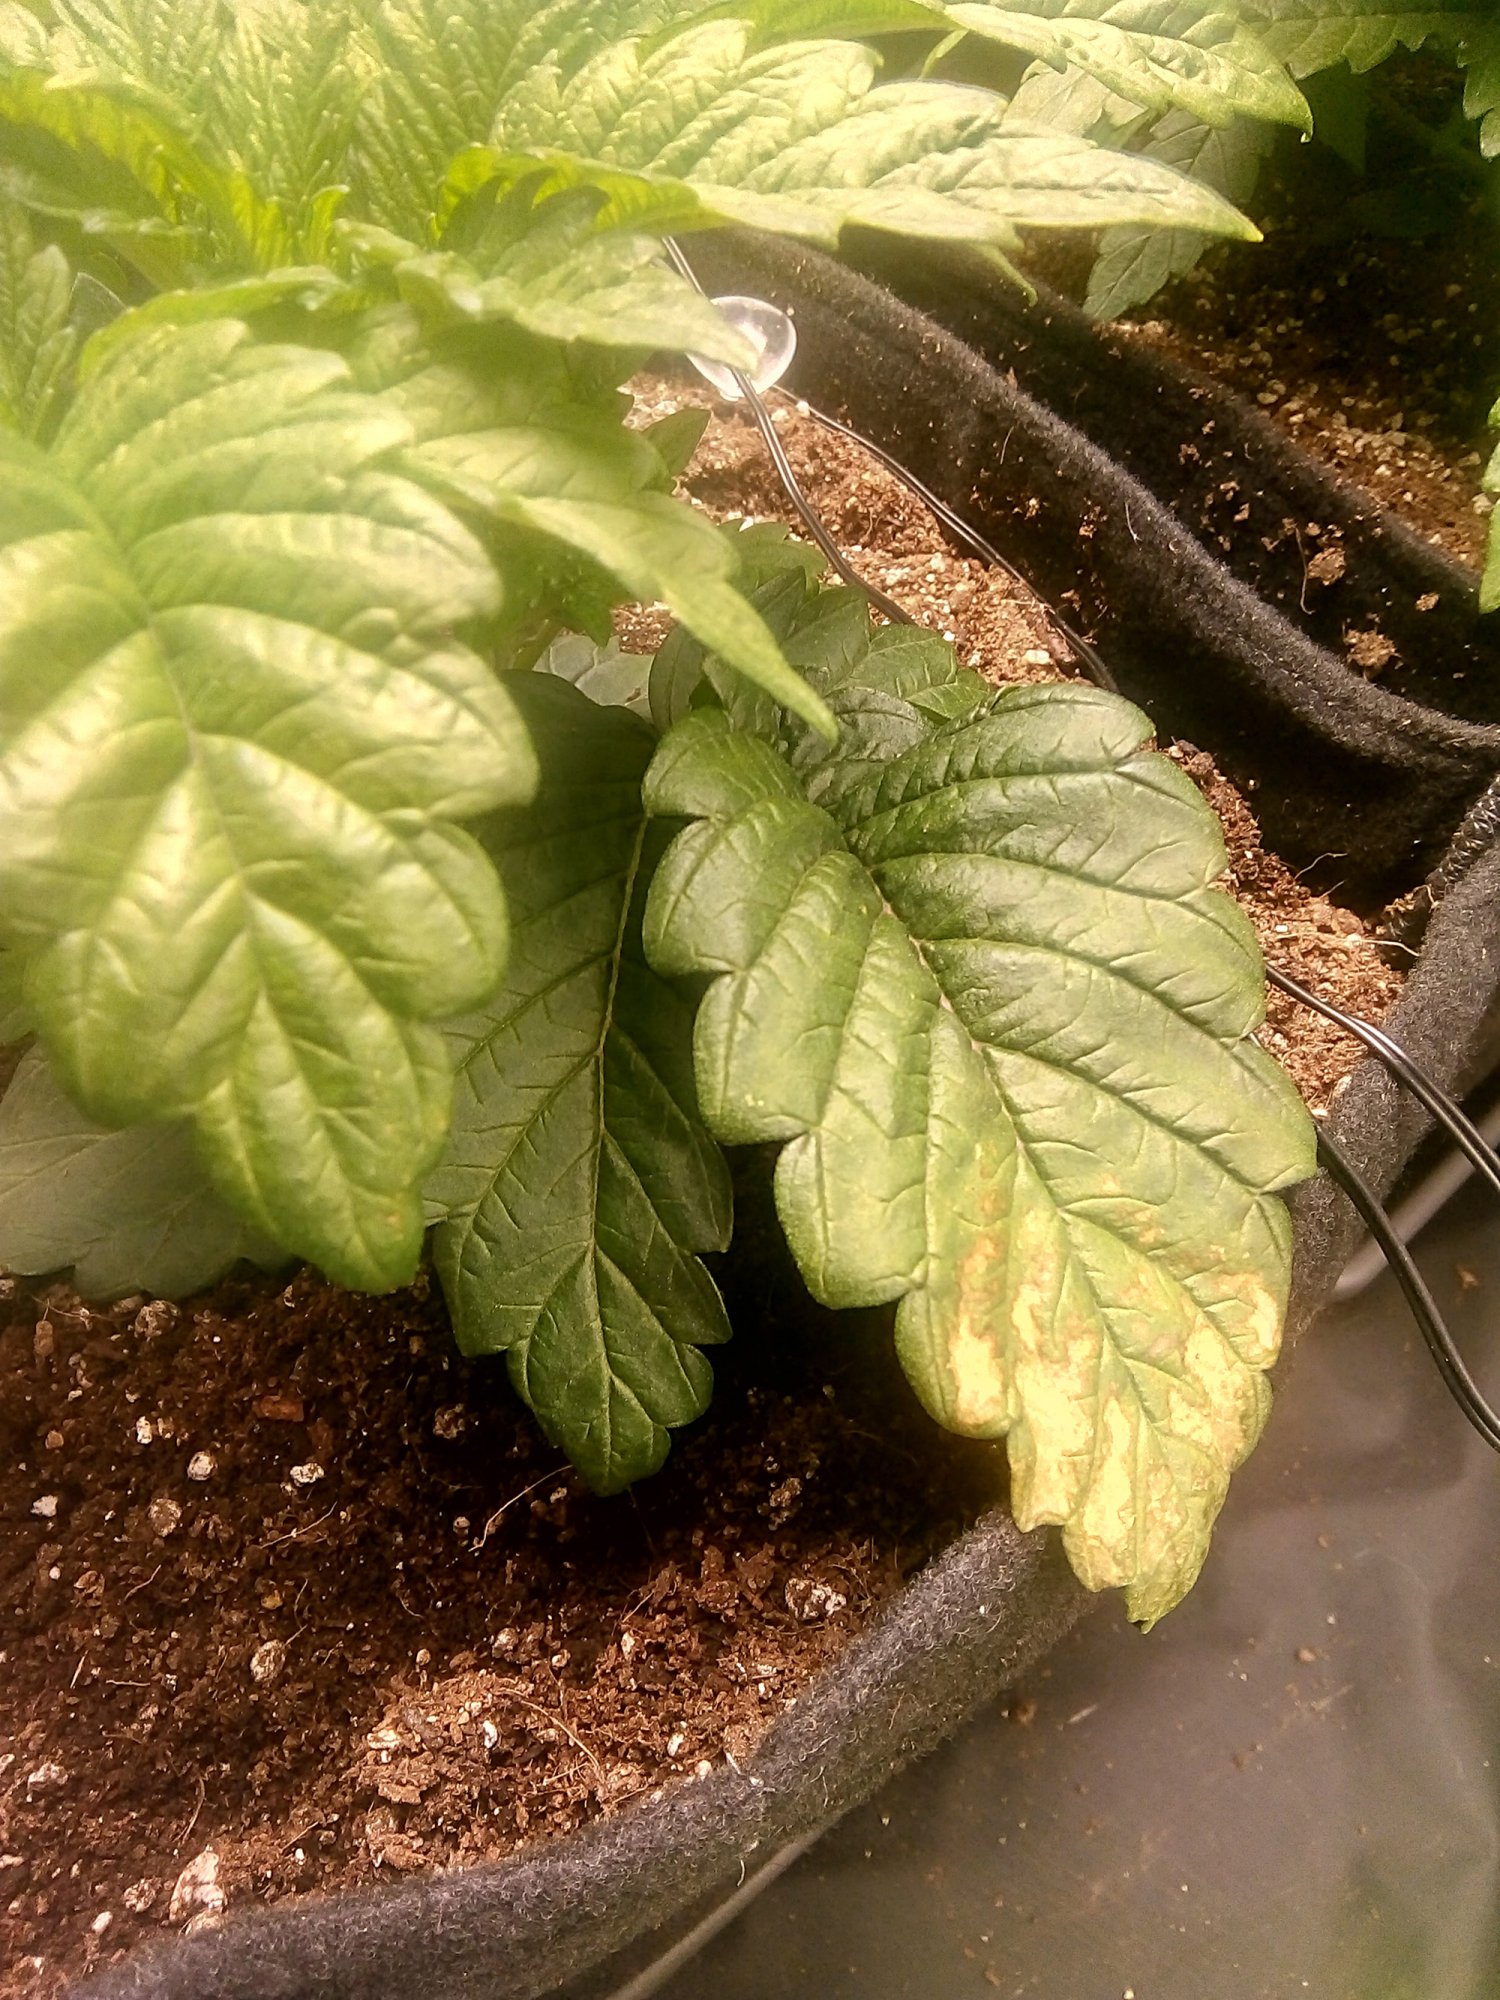 Brown spots on some leaves 2